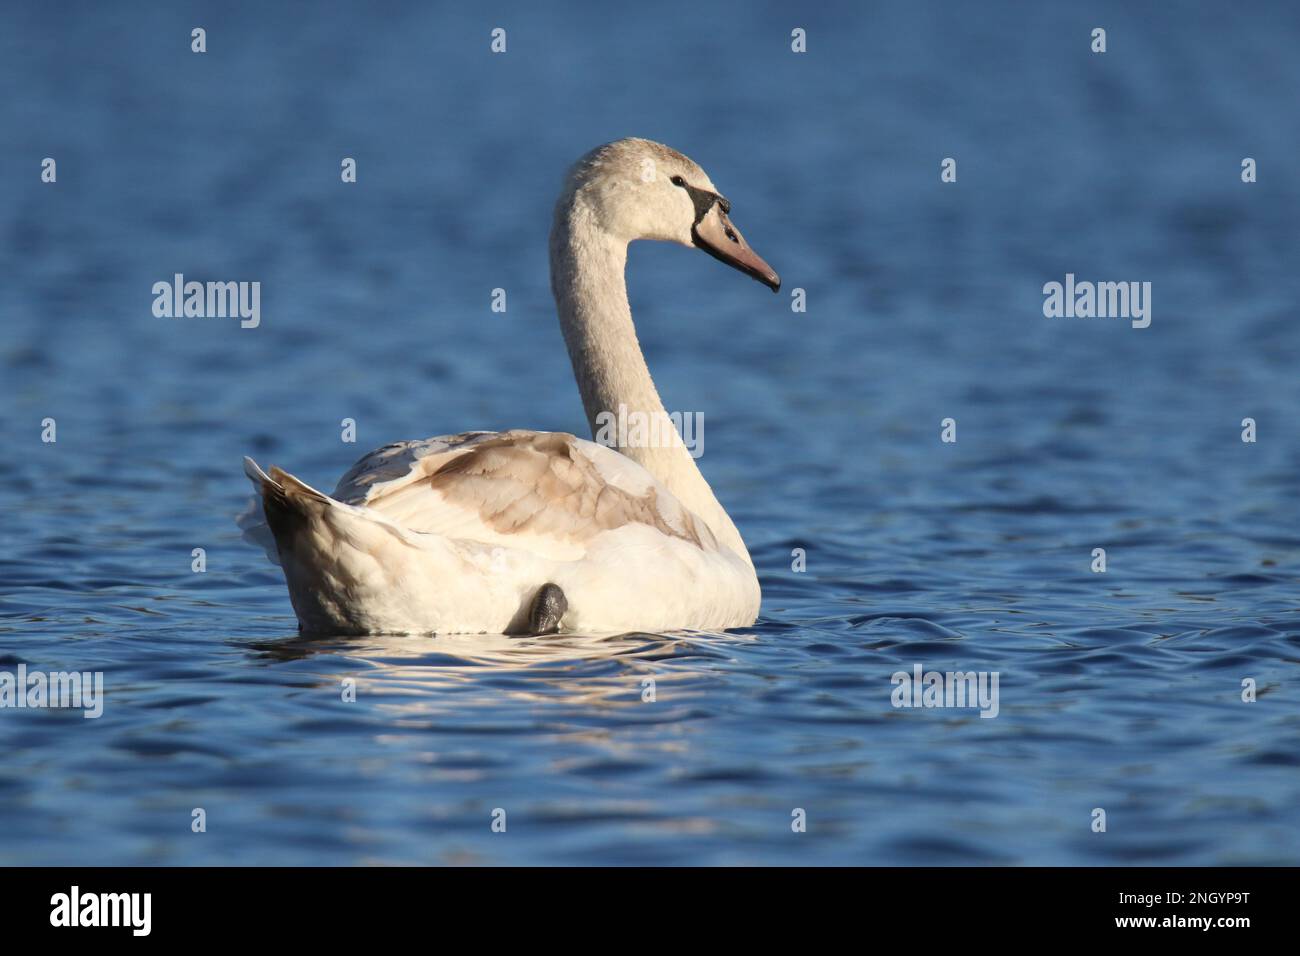 One young mute swan Cygnus olor swimming on a blue lake in winter Stock Photo